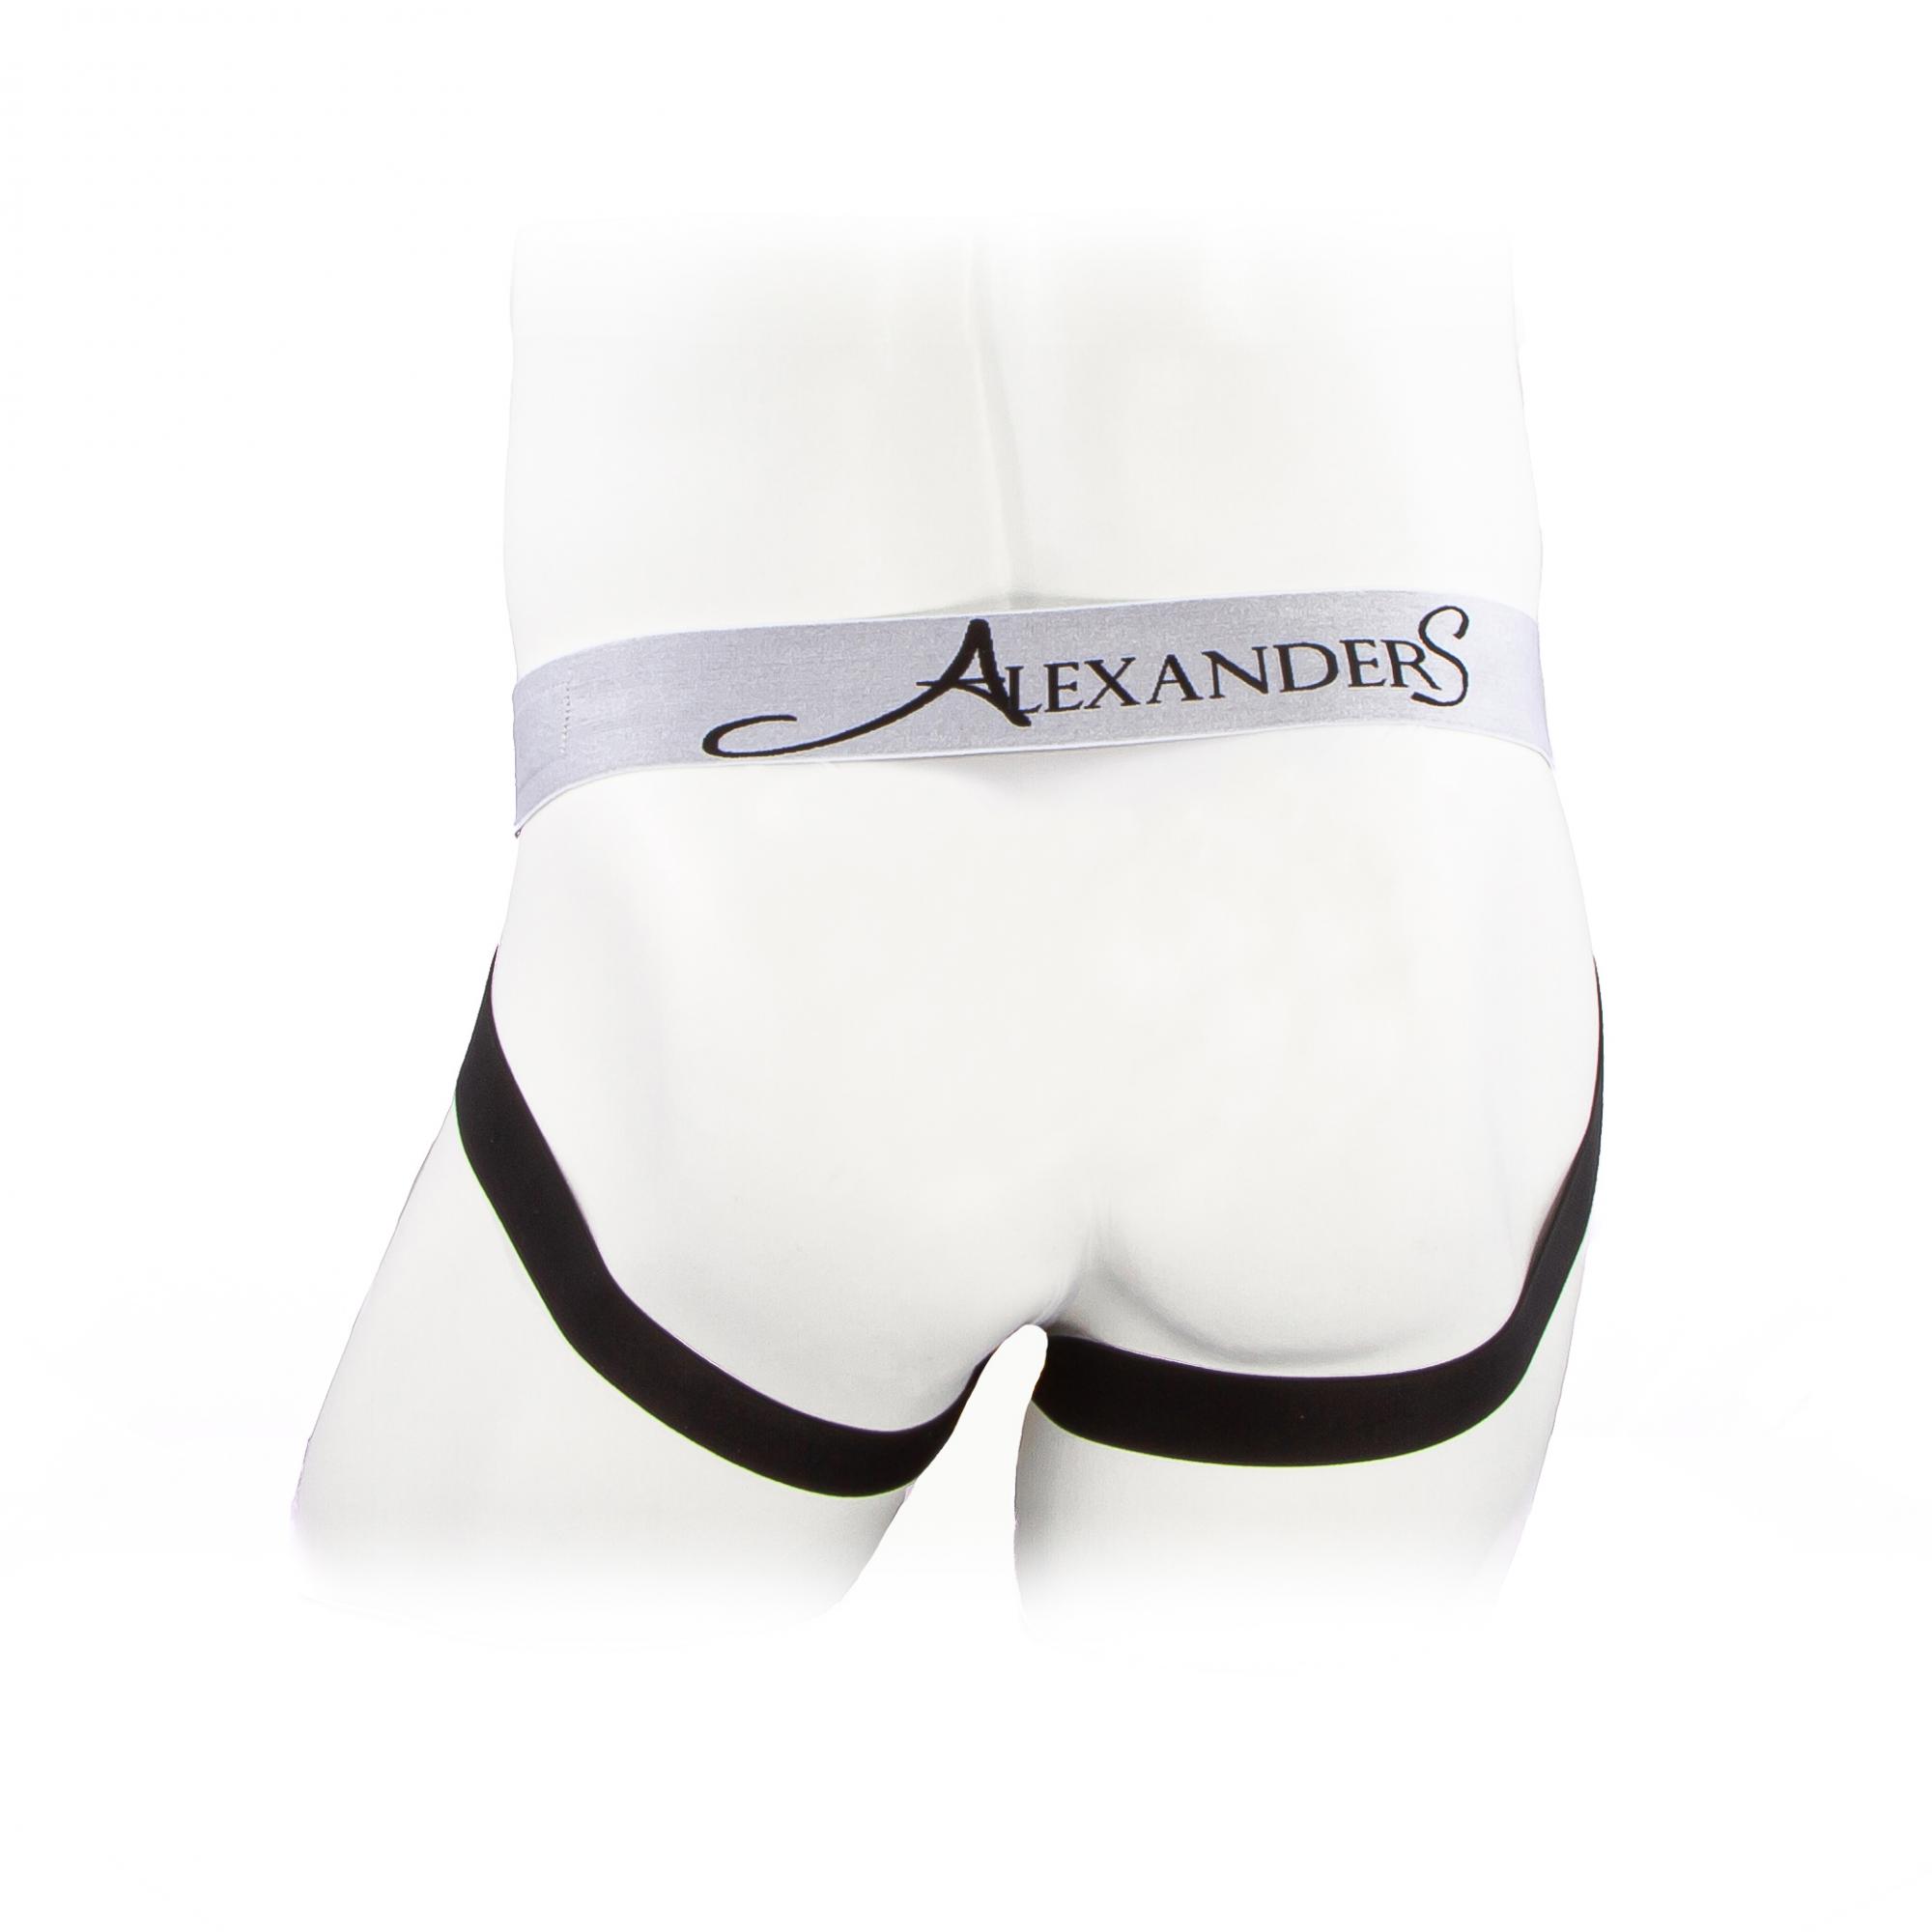 AlexanderS Jockstrap collection is here!  This bright jock is fun, sporty and supportive in all the right places. Traditionally, athletic supporters furnish.